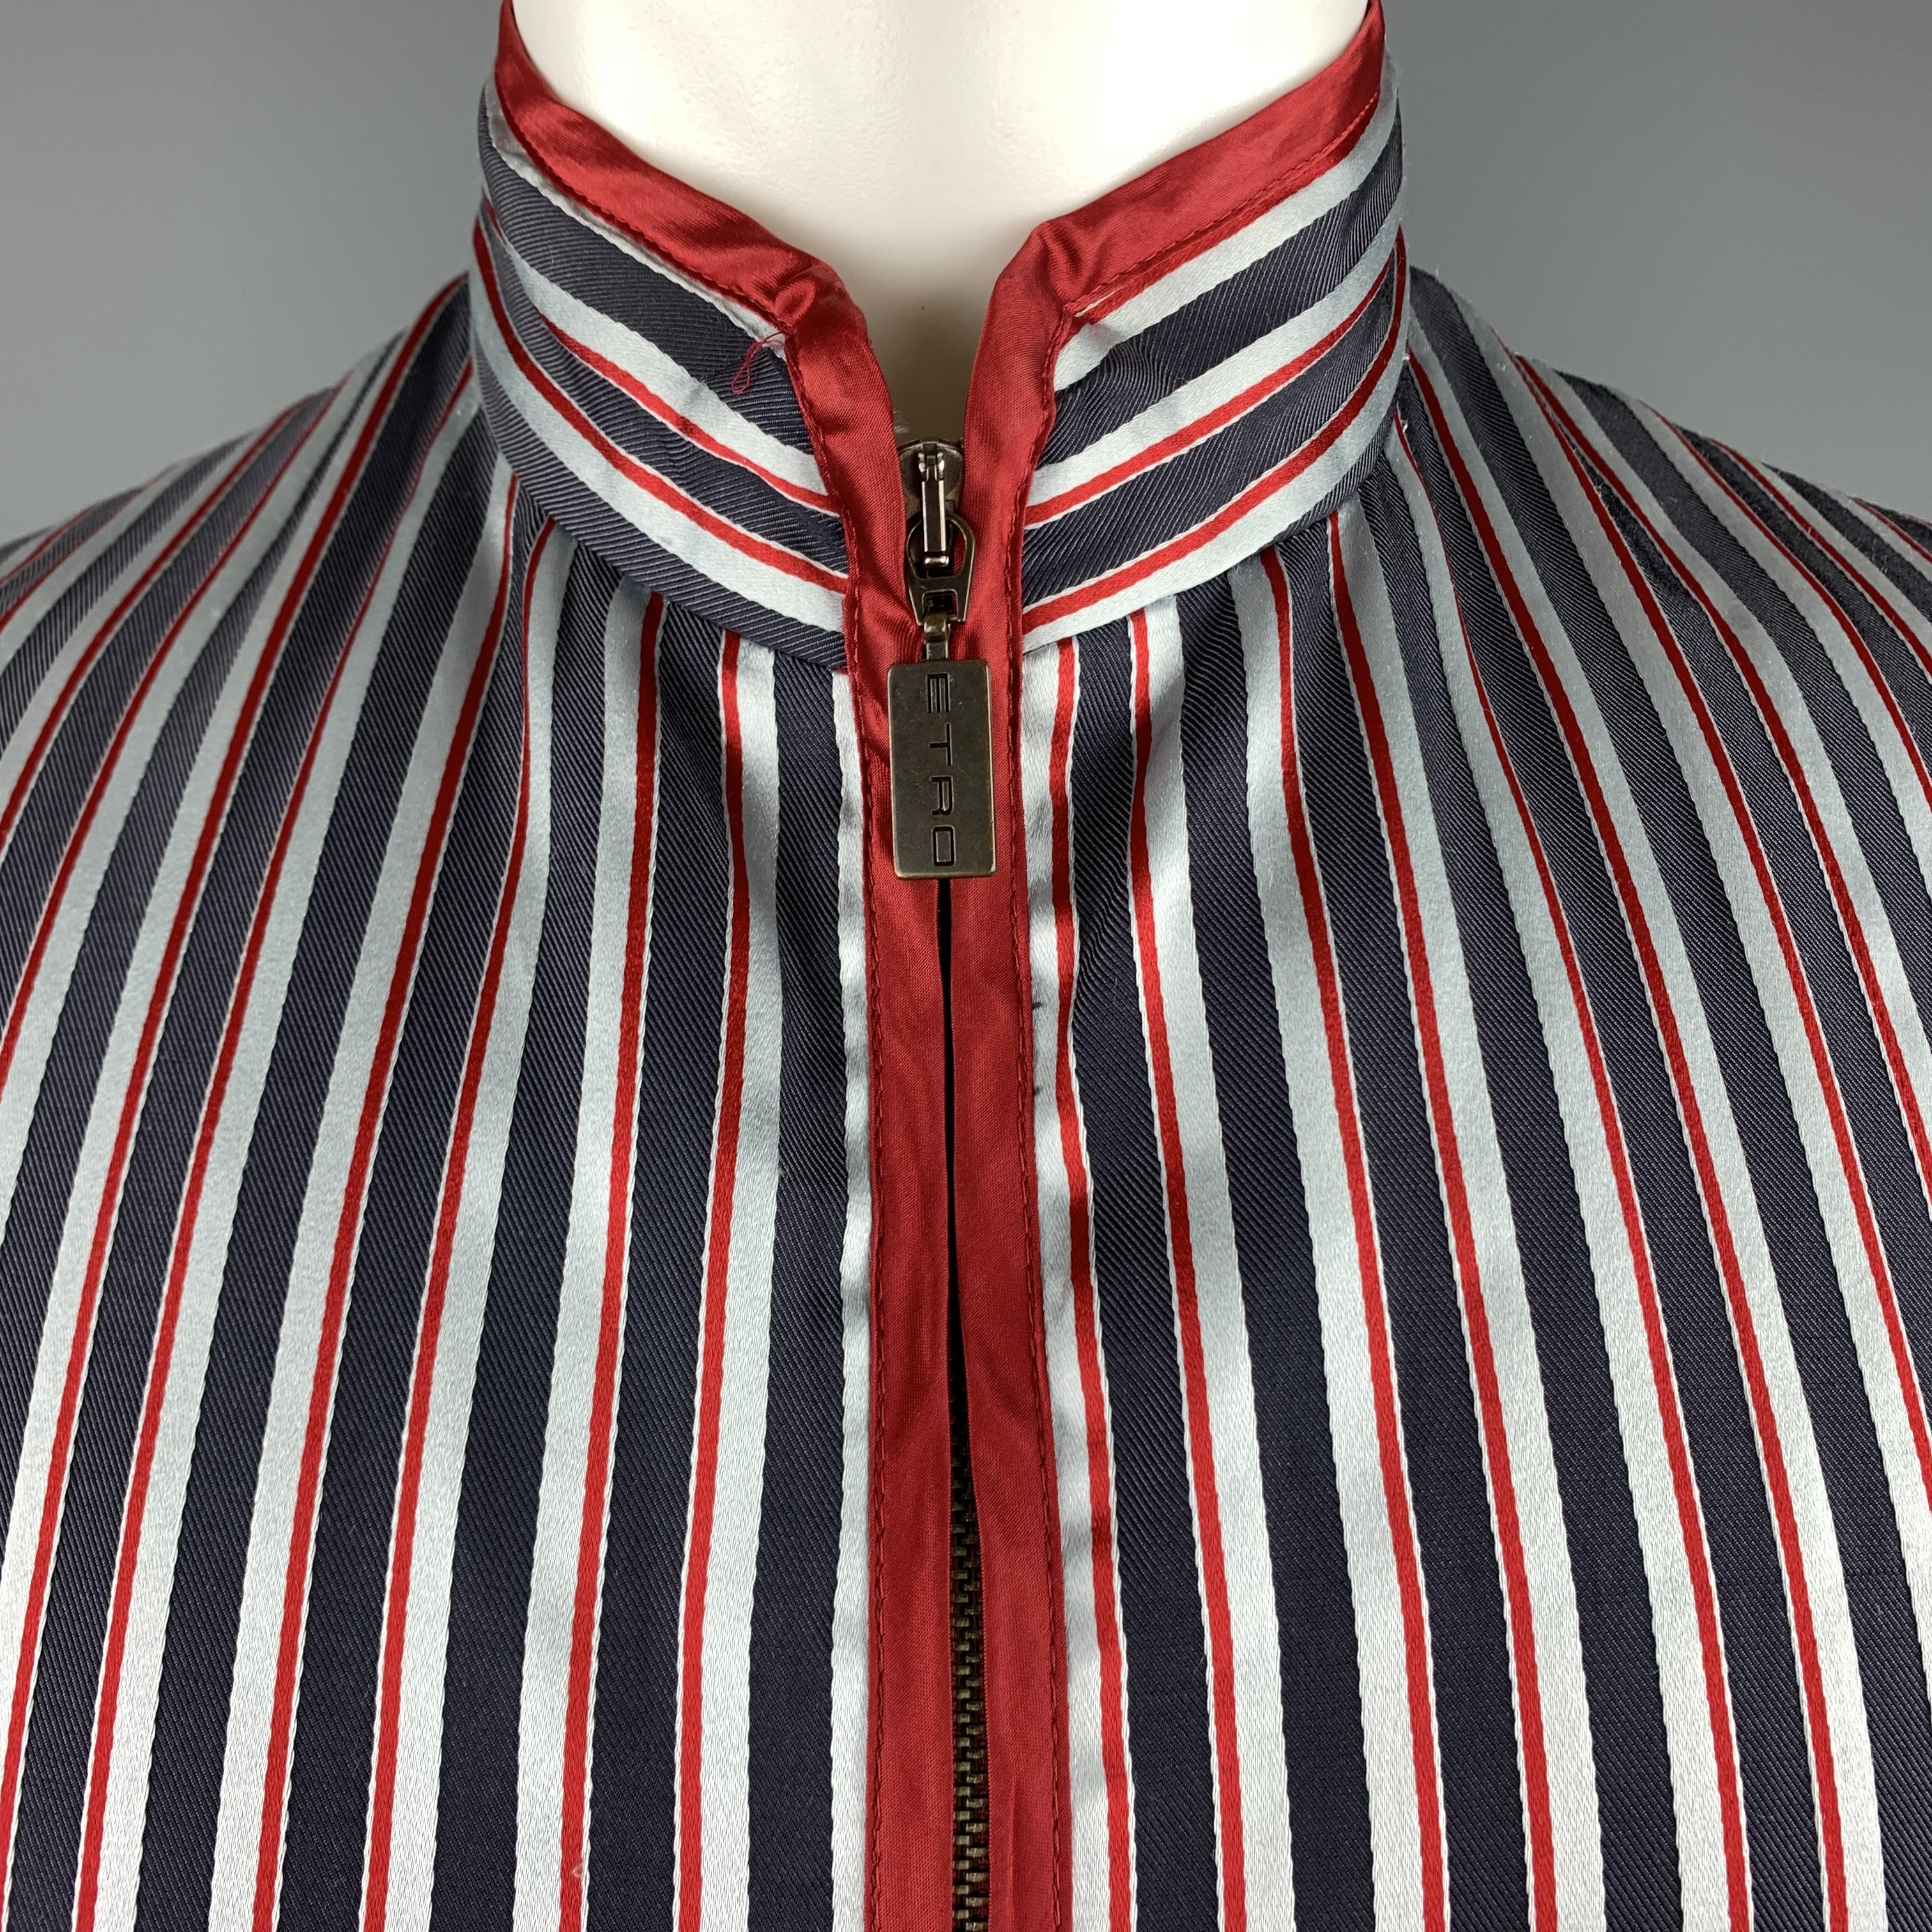 ETRO zip vest comes in light blue and navy striped satin with a high neck collar and burgundy satin piping. Made in Italy.

Excellent Pre-Owned Condition.
Marked: M

Measurements:

Shoulder: 15 in.
Chest: 42 in.
Length: 23 in.